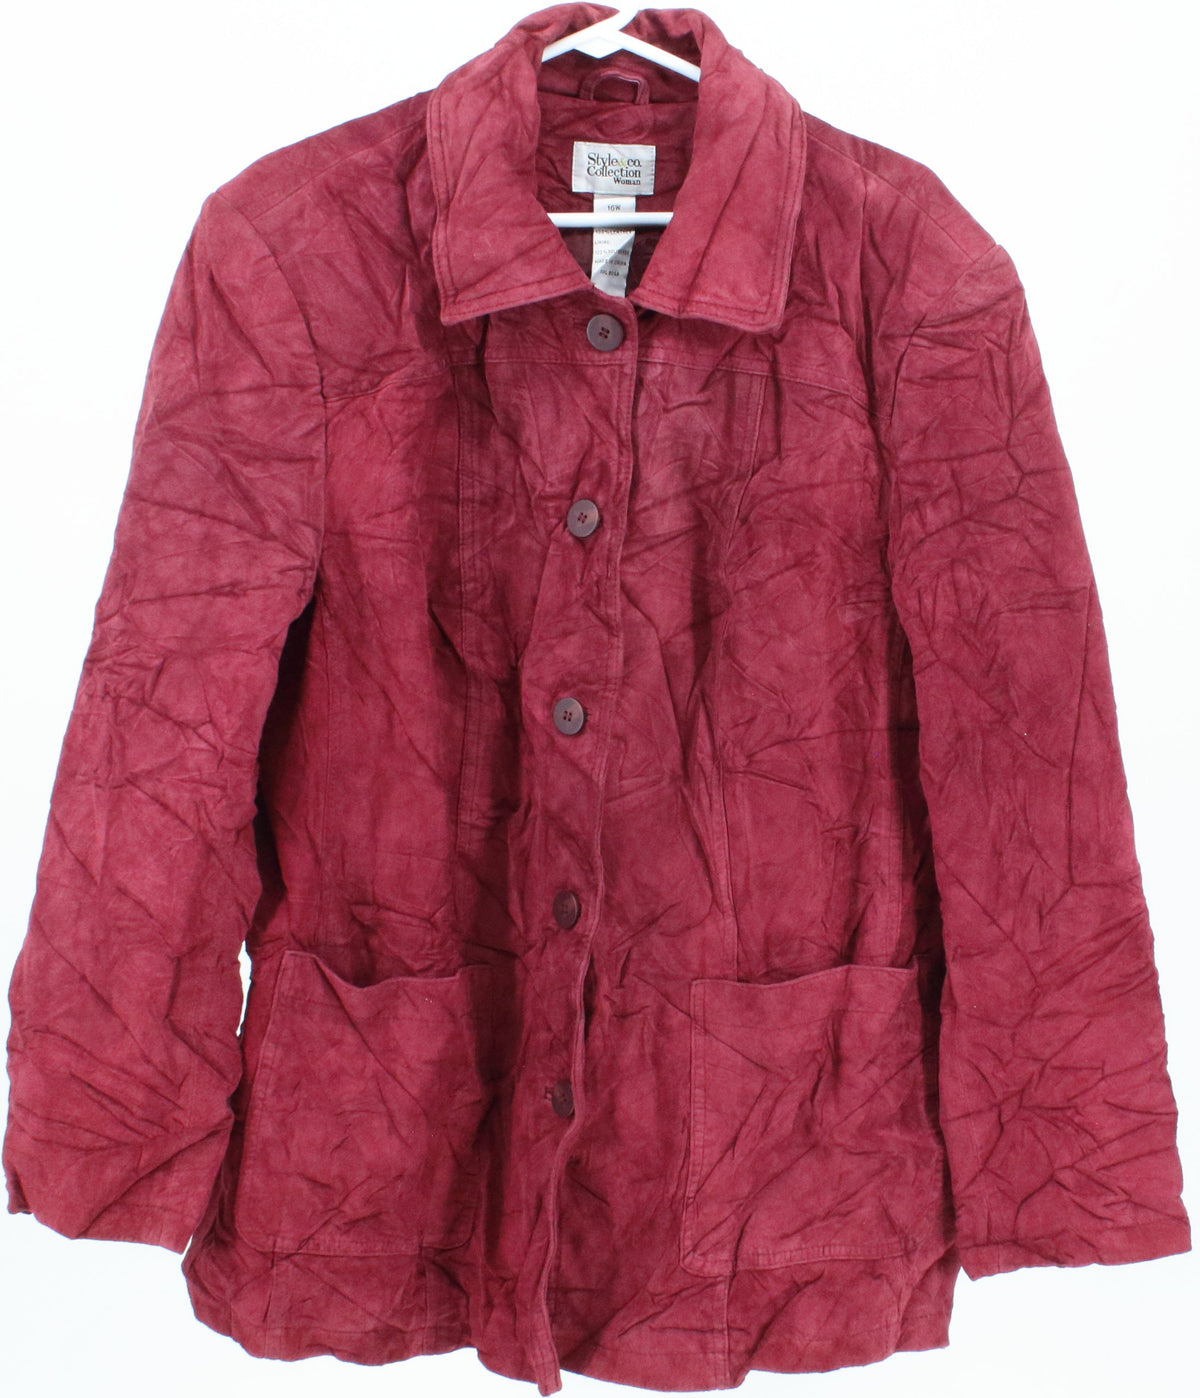 Style & Co. Collection Woman Burgundy Leather Jacket